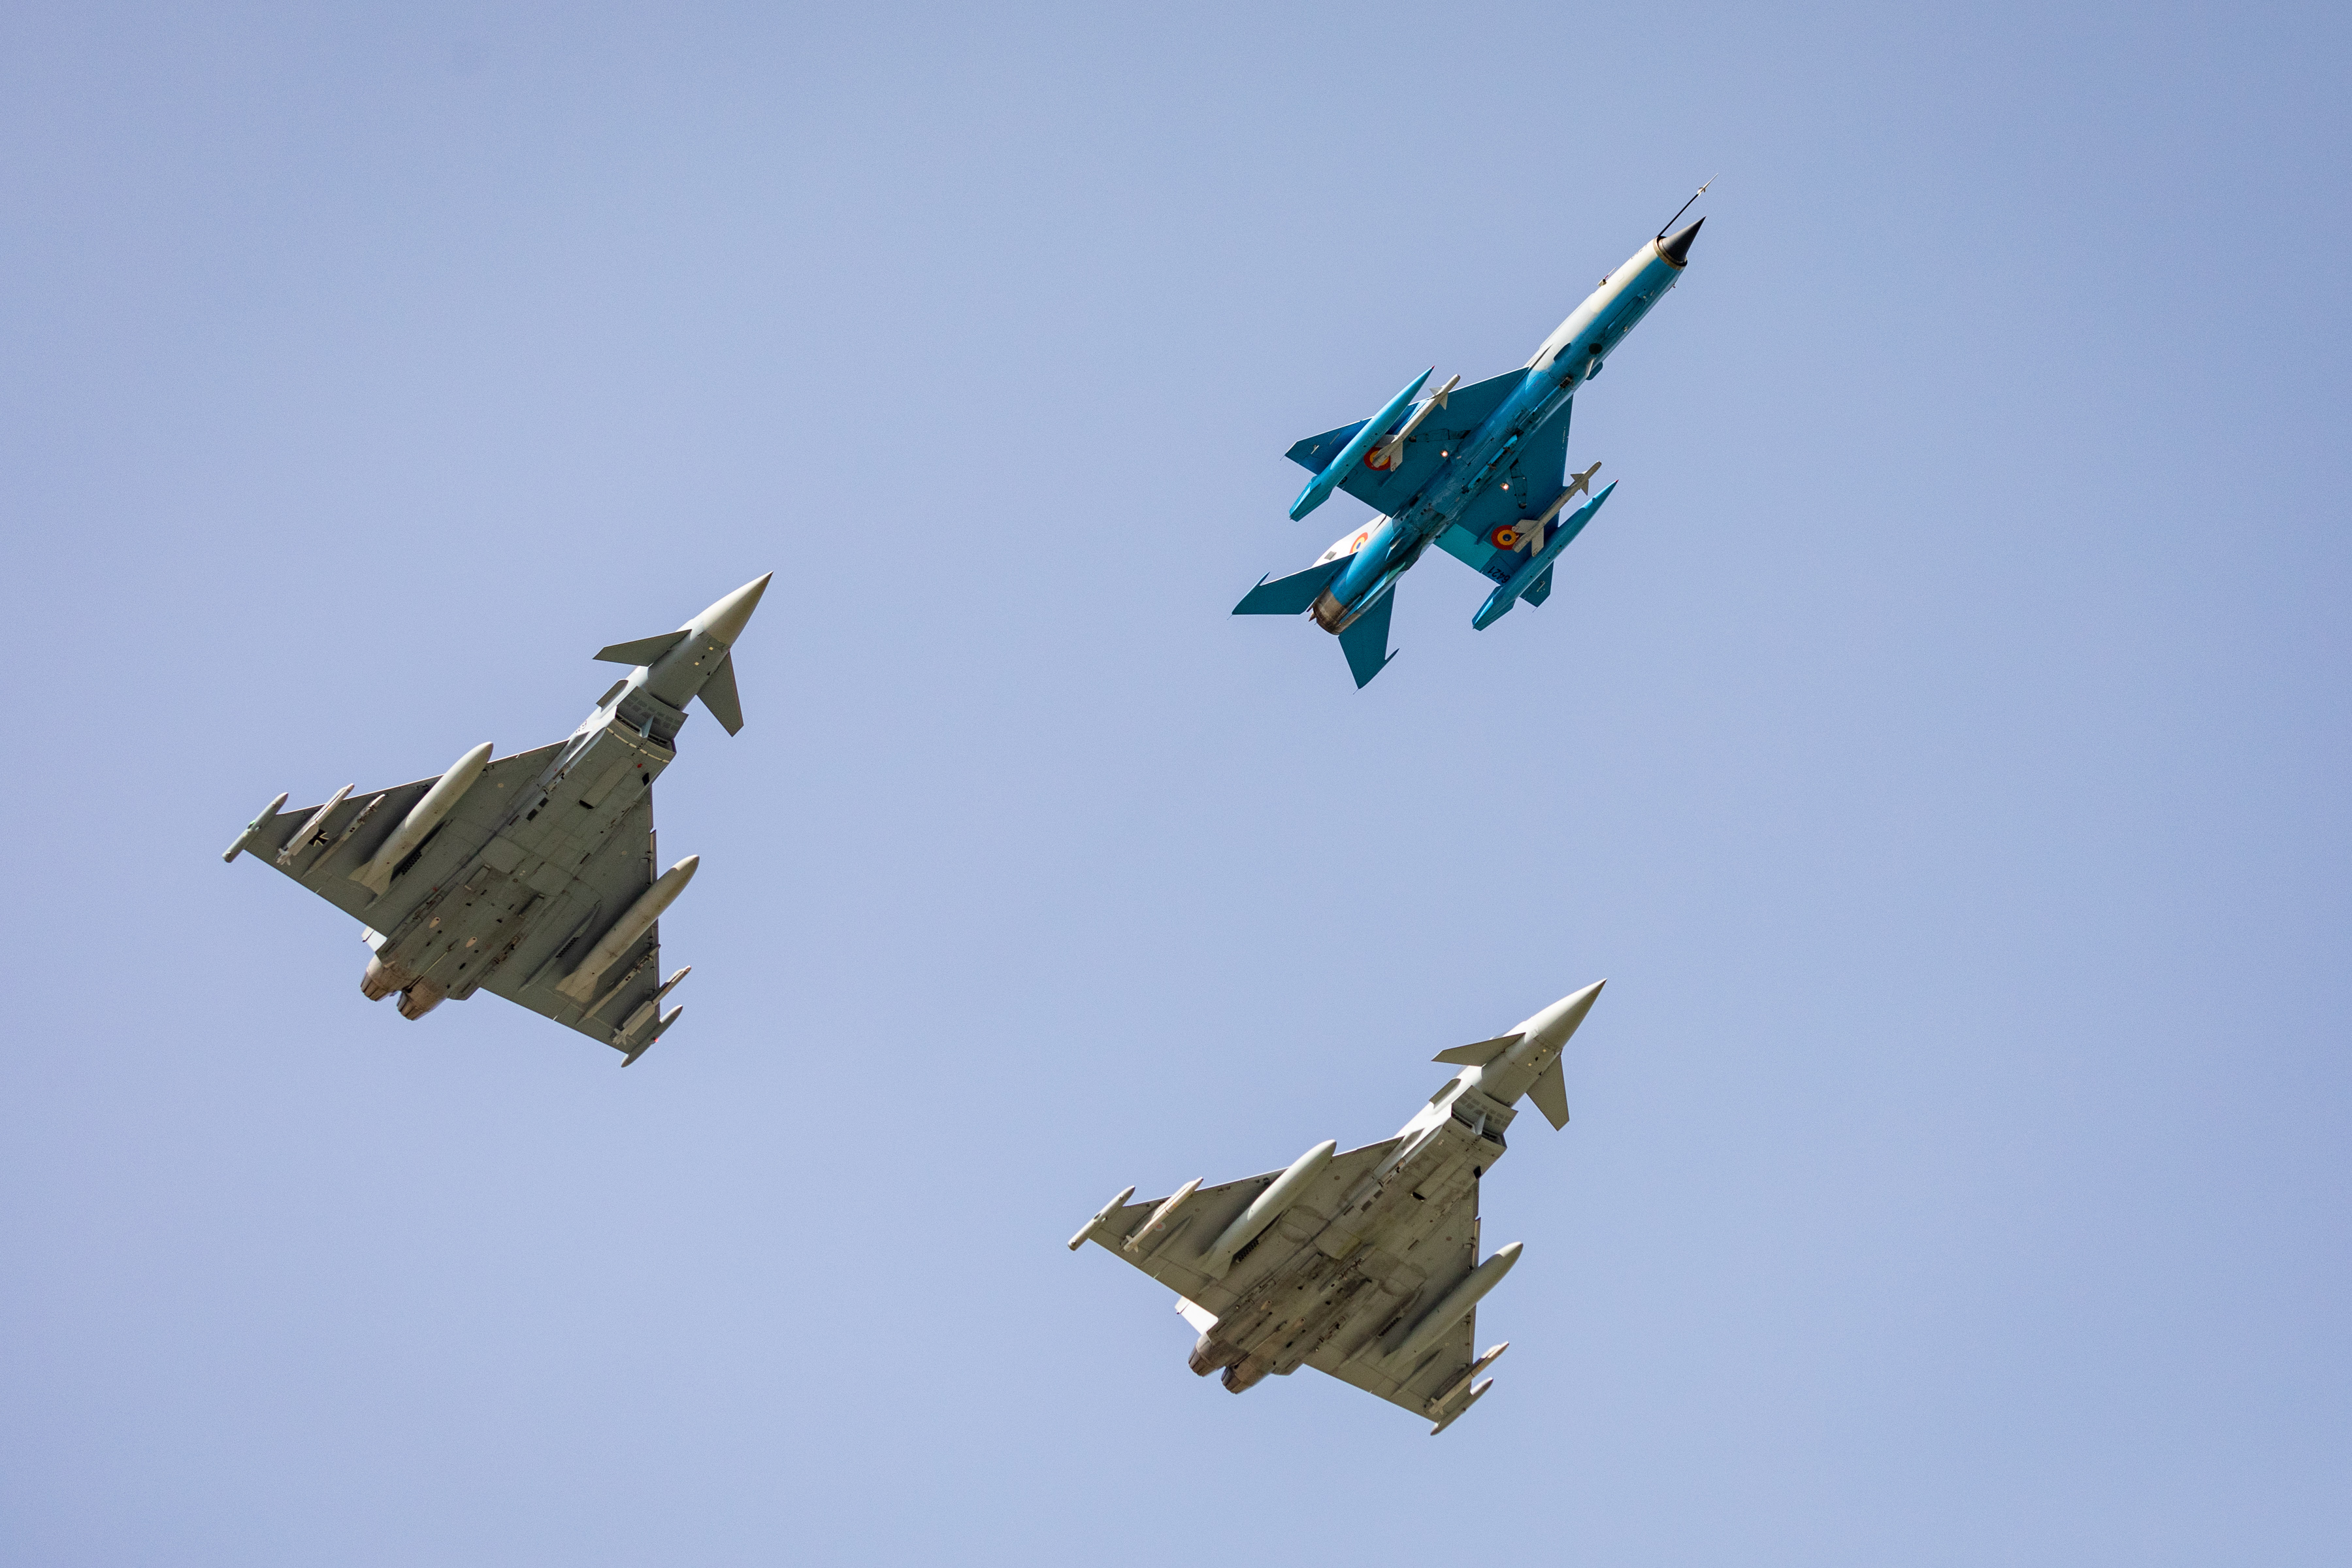 Two RAF Typhoons and a Romanian MIG 21 LanceR in formation.